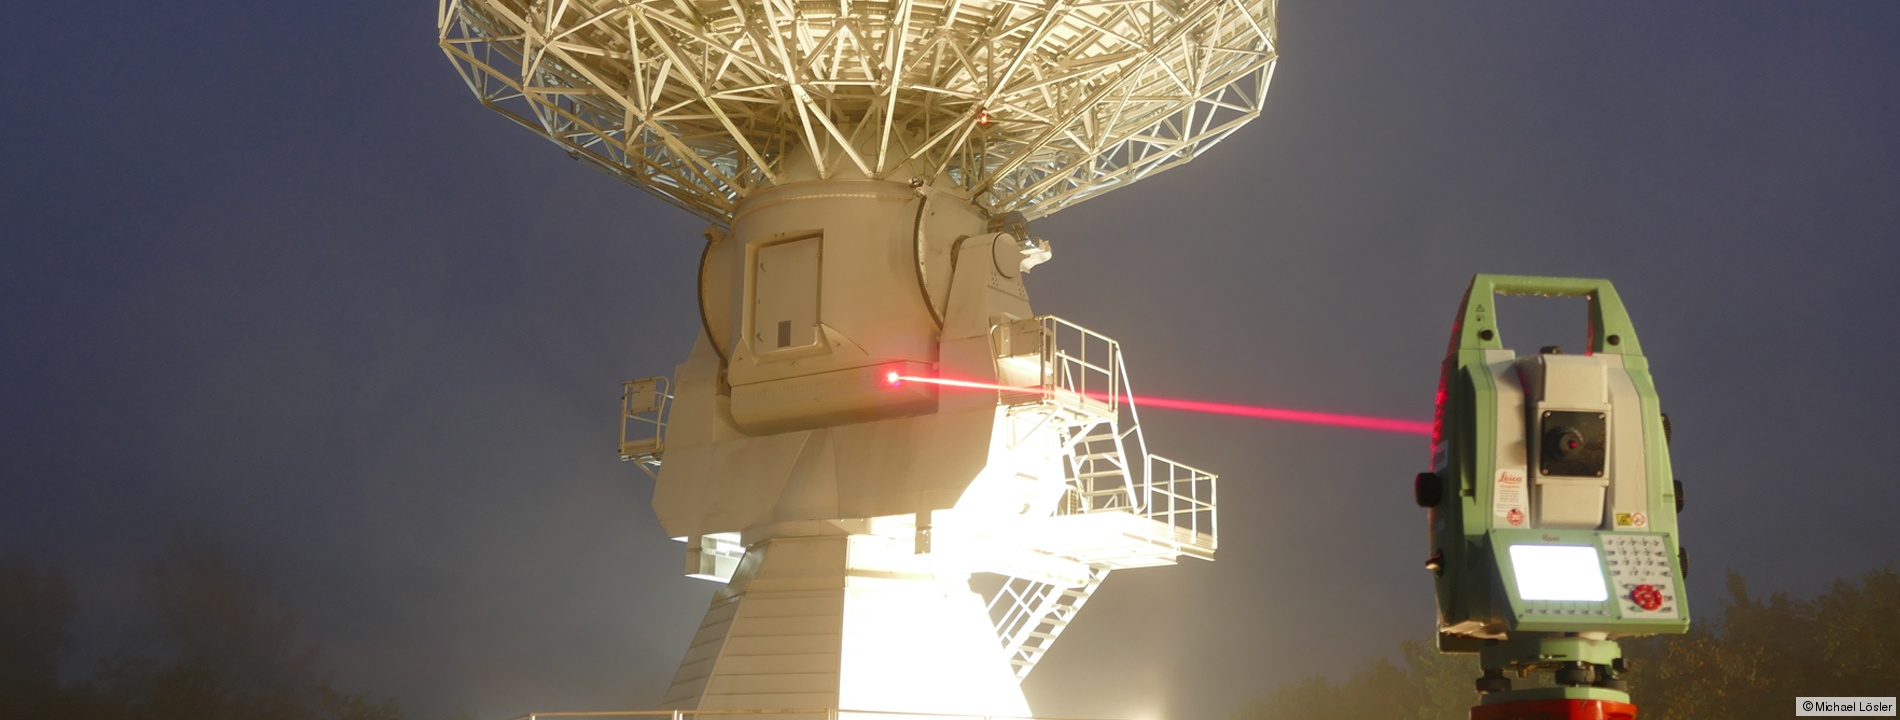 Reference Point Determination of the TWIN Radio Telescope at Wettzell